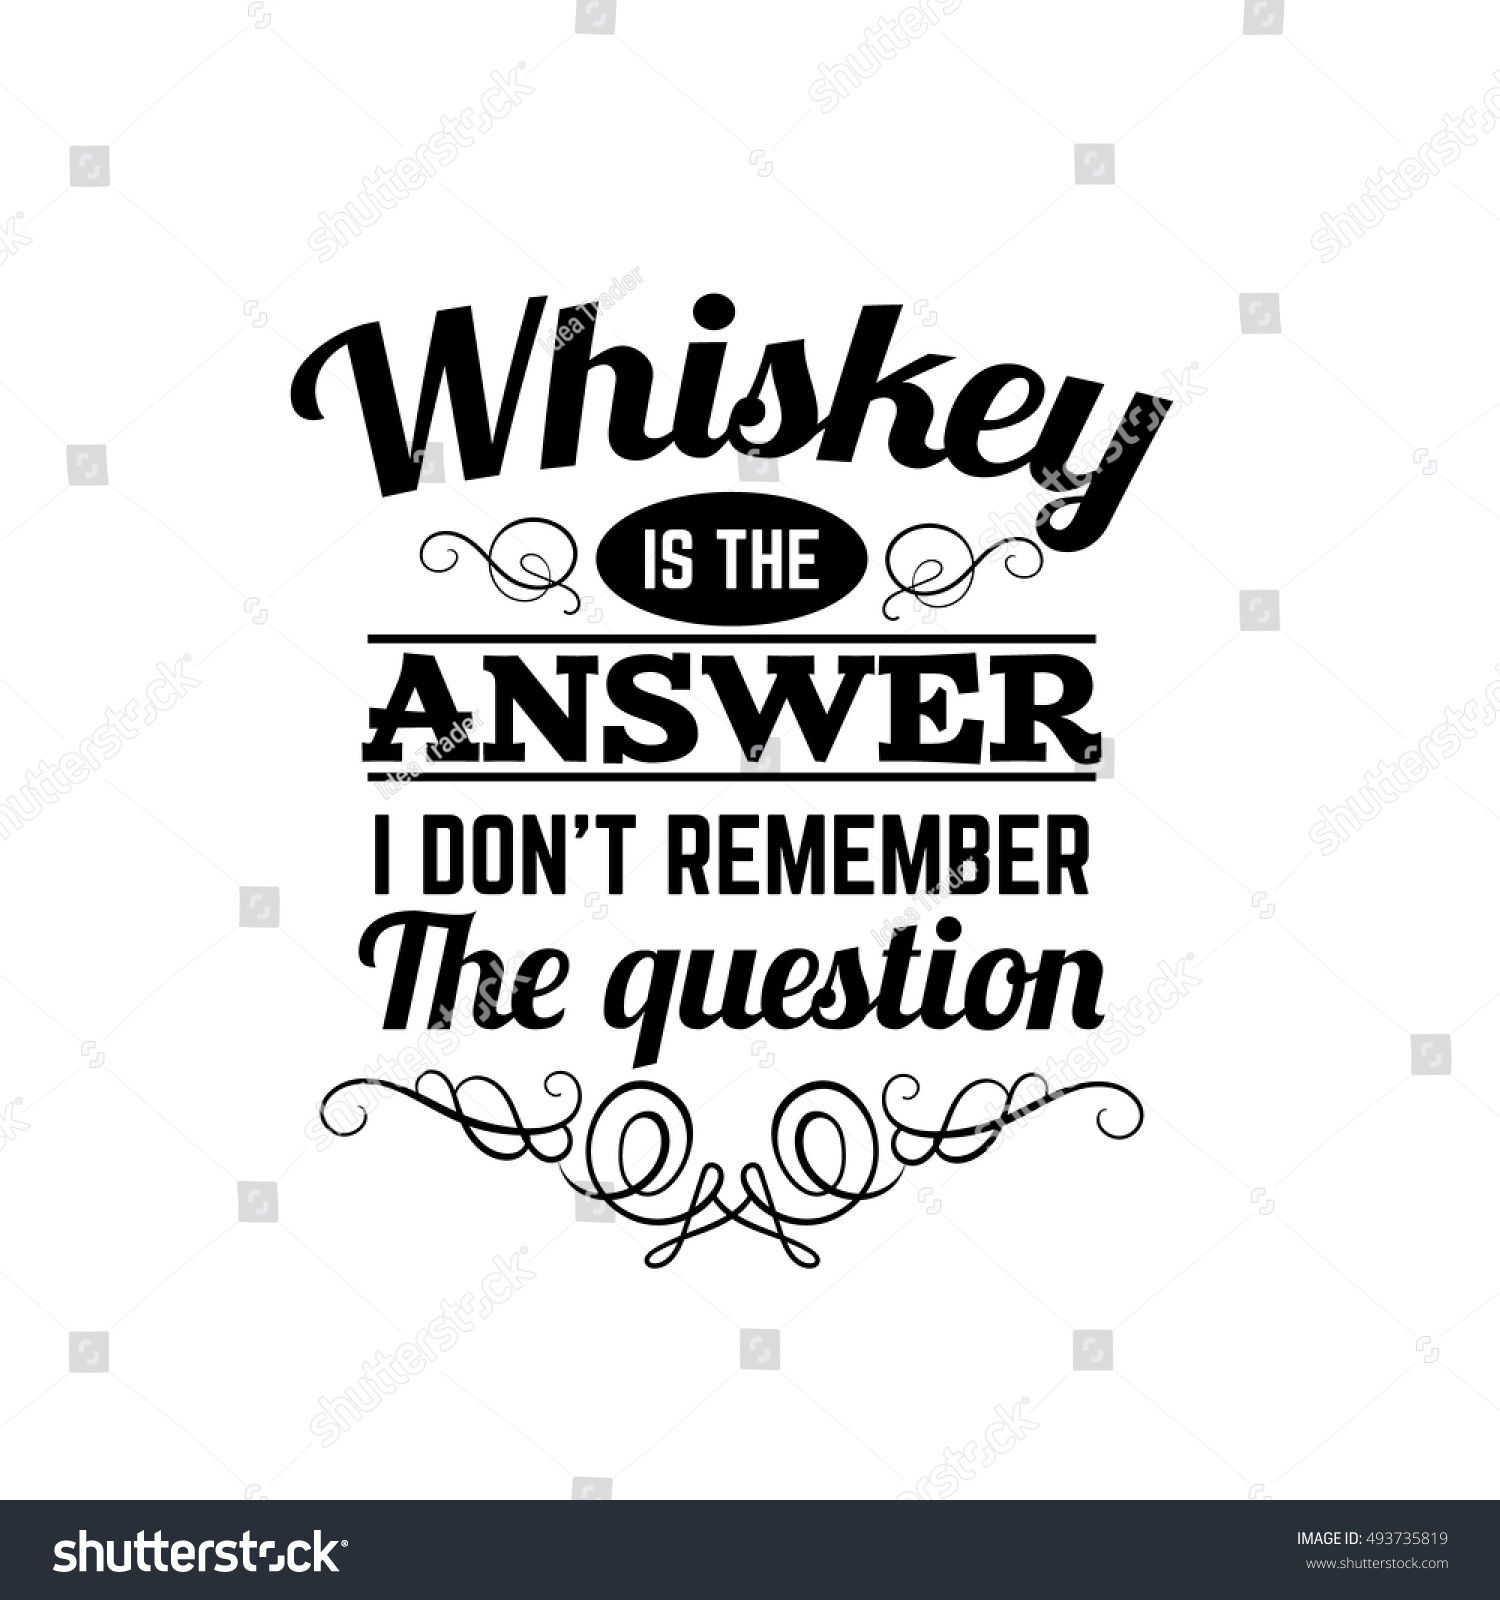 Download Vector Quote Typographical Background About Whiskey Stock Vector 493735819 - Shutterstock